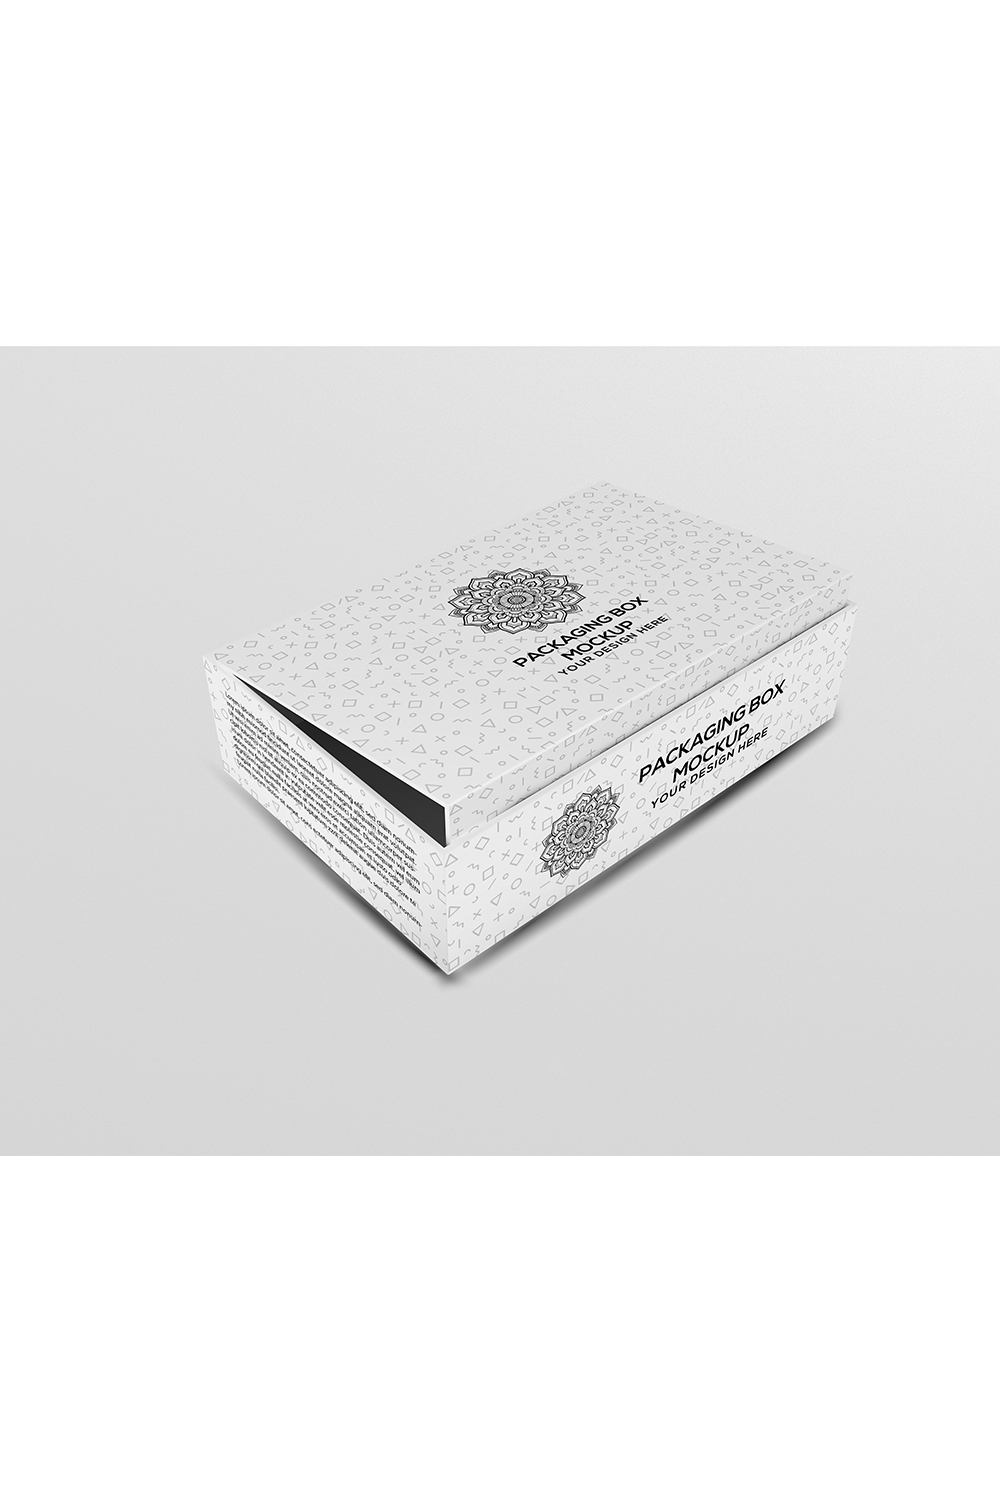 Packaging Box Mockup pinterest preview image.